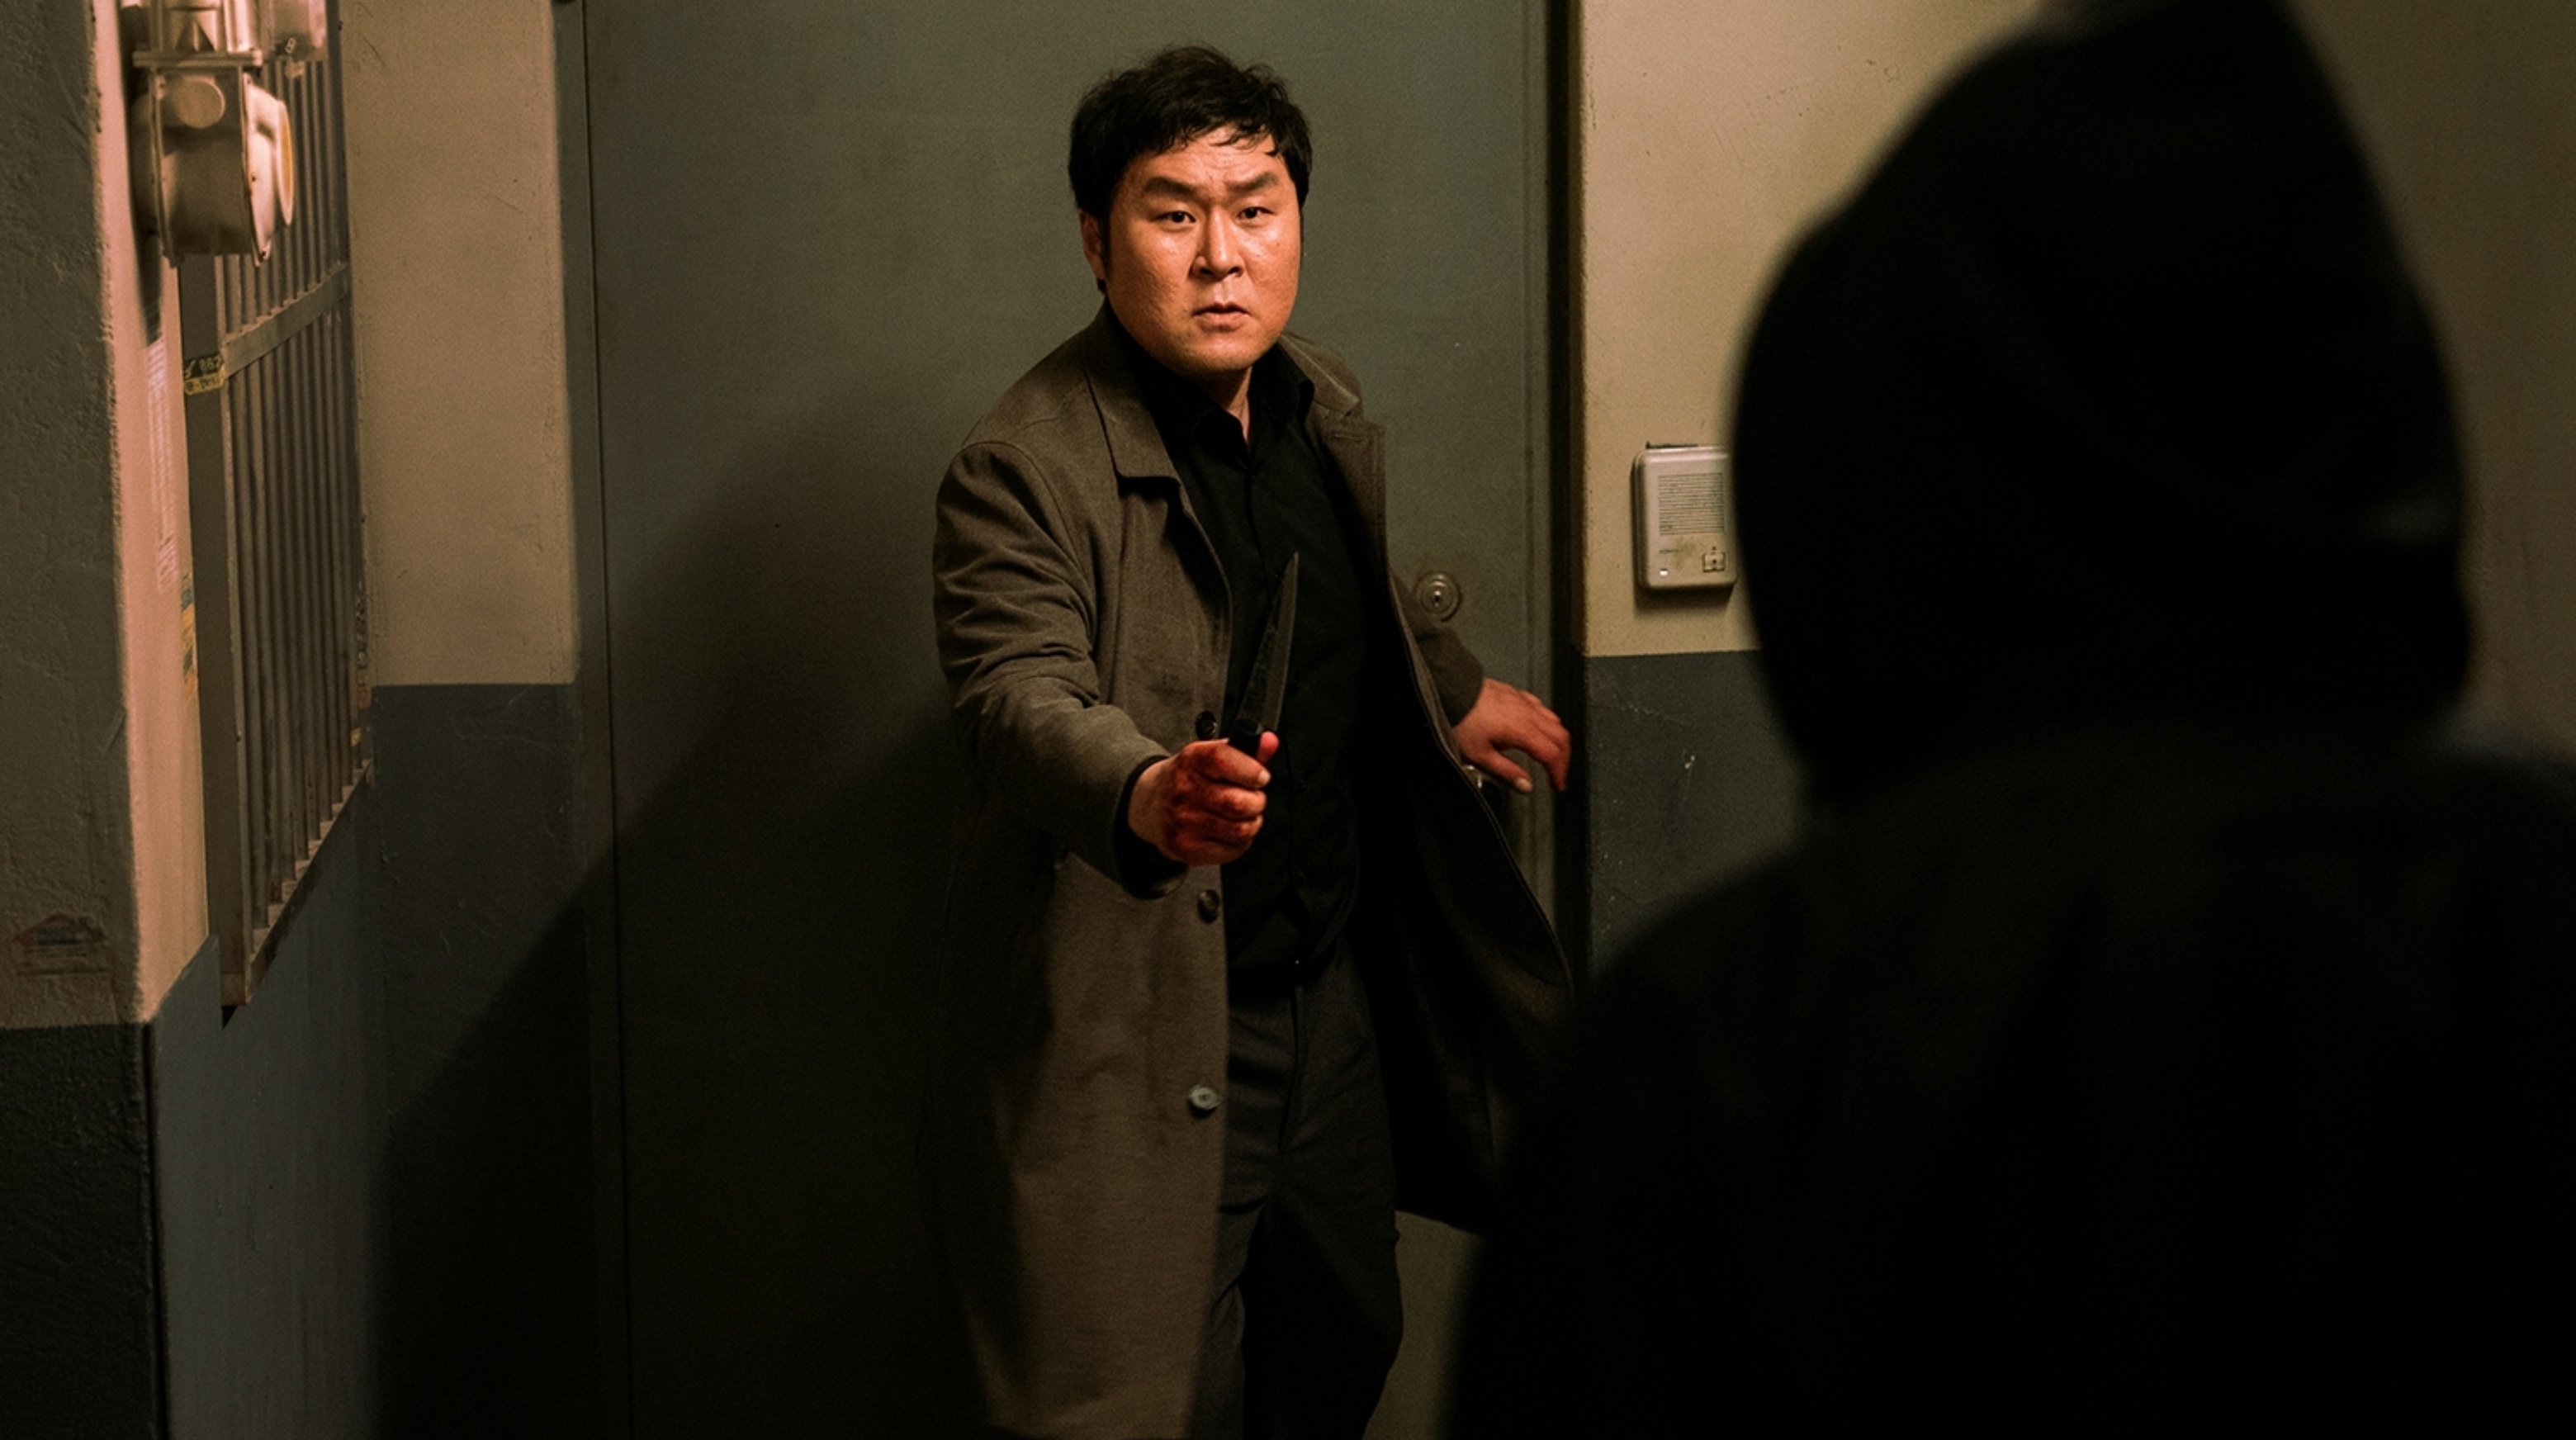 Yoon Kyung-ho as Dong-hoon in 'My Name' storyline standing in front of apartment holding knife.